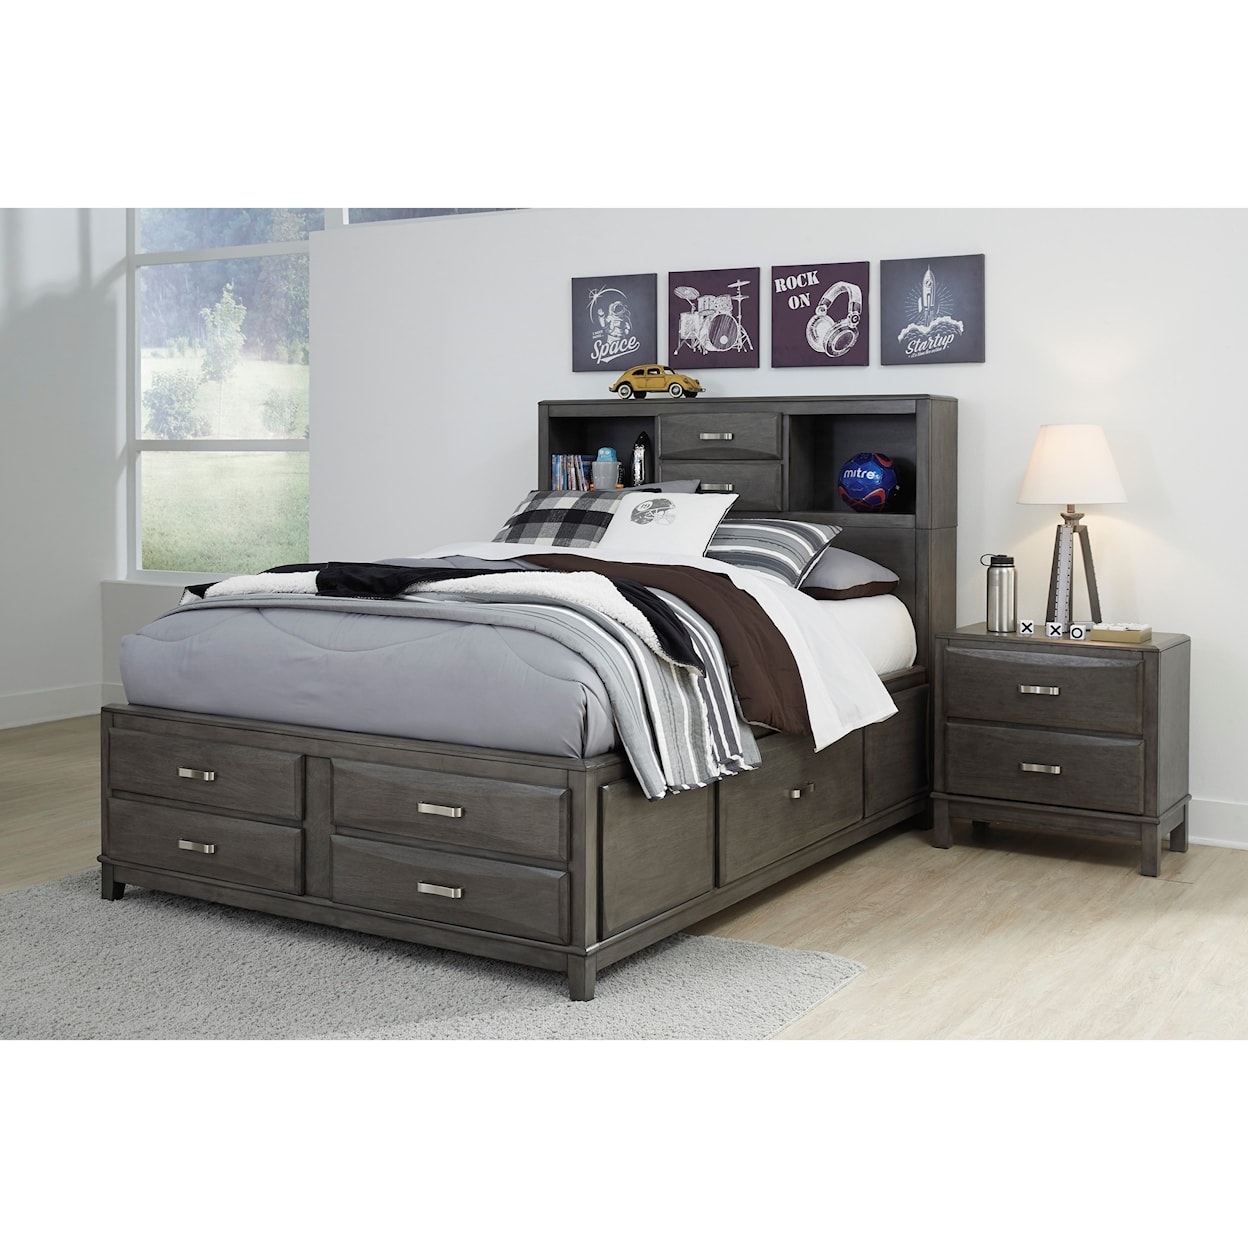 Benchcraft Caitbrook Full Storage Bed with 7 Drawers